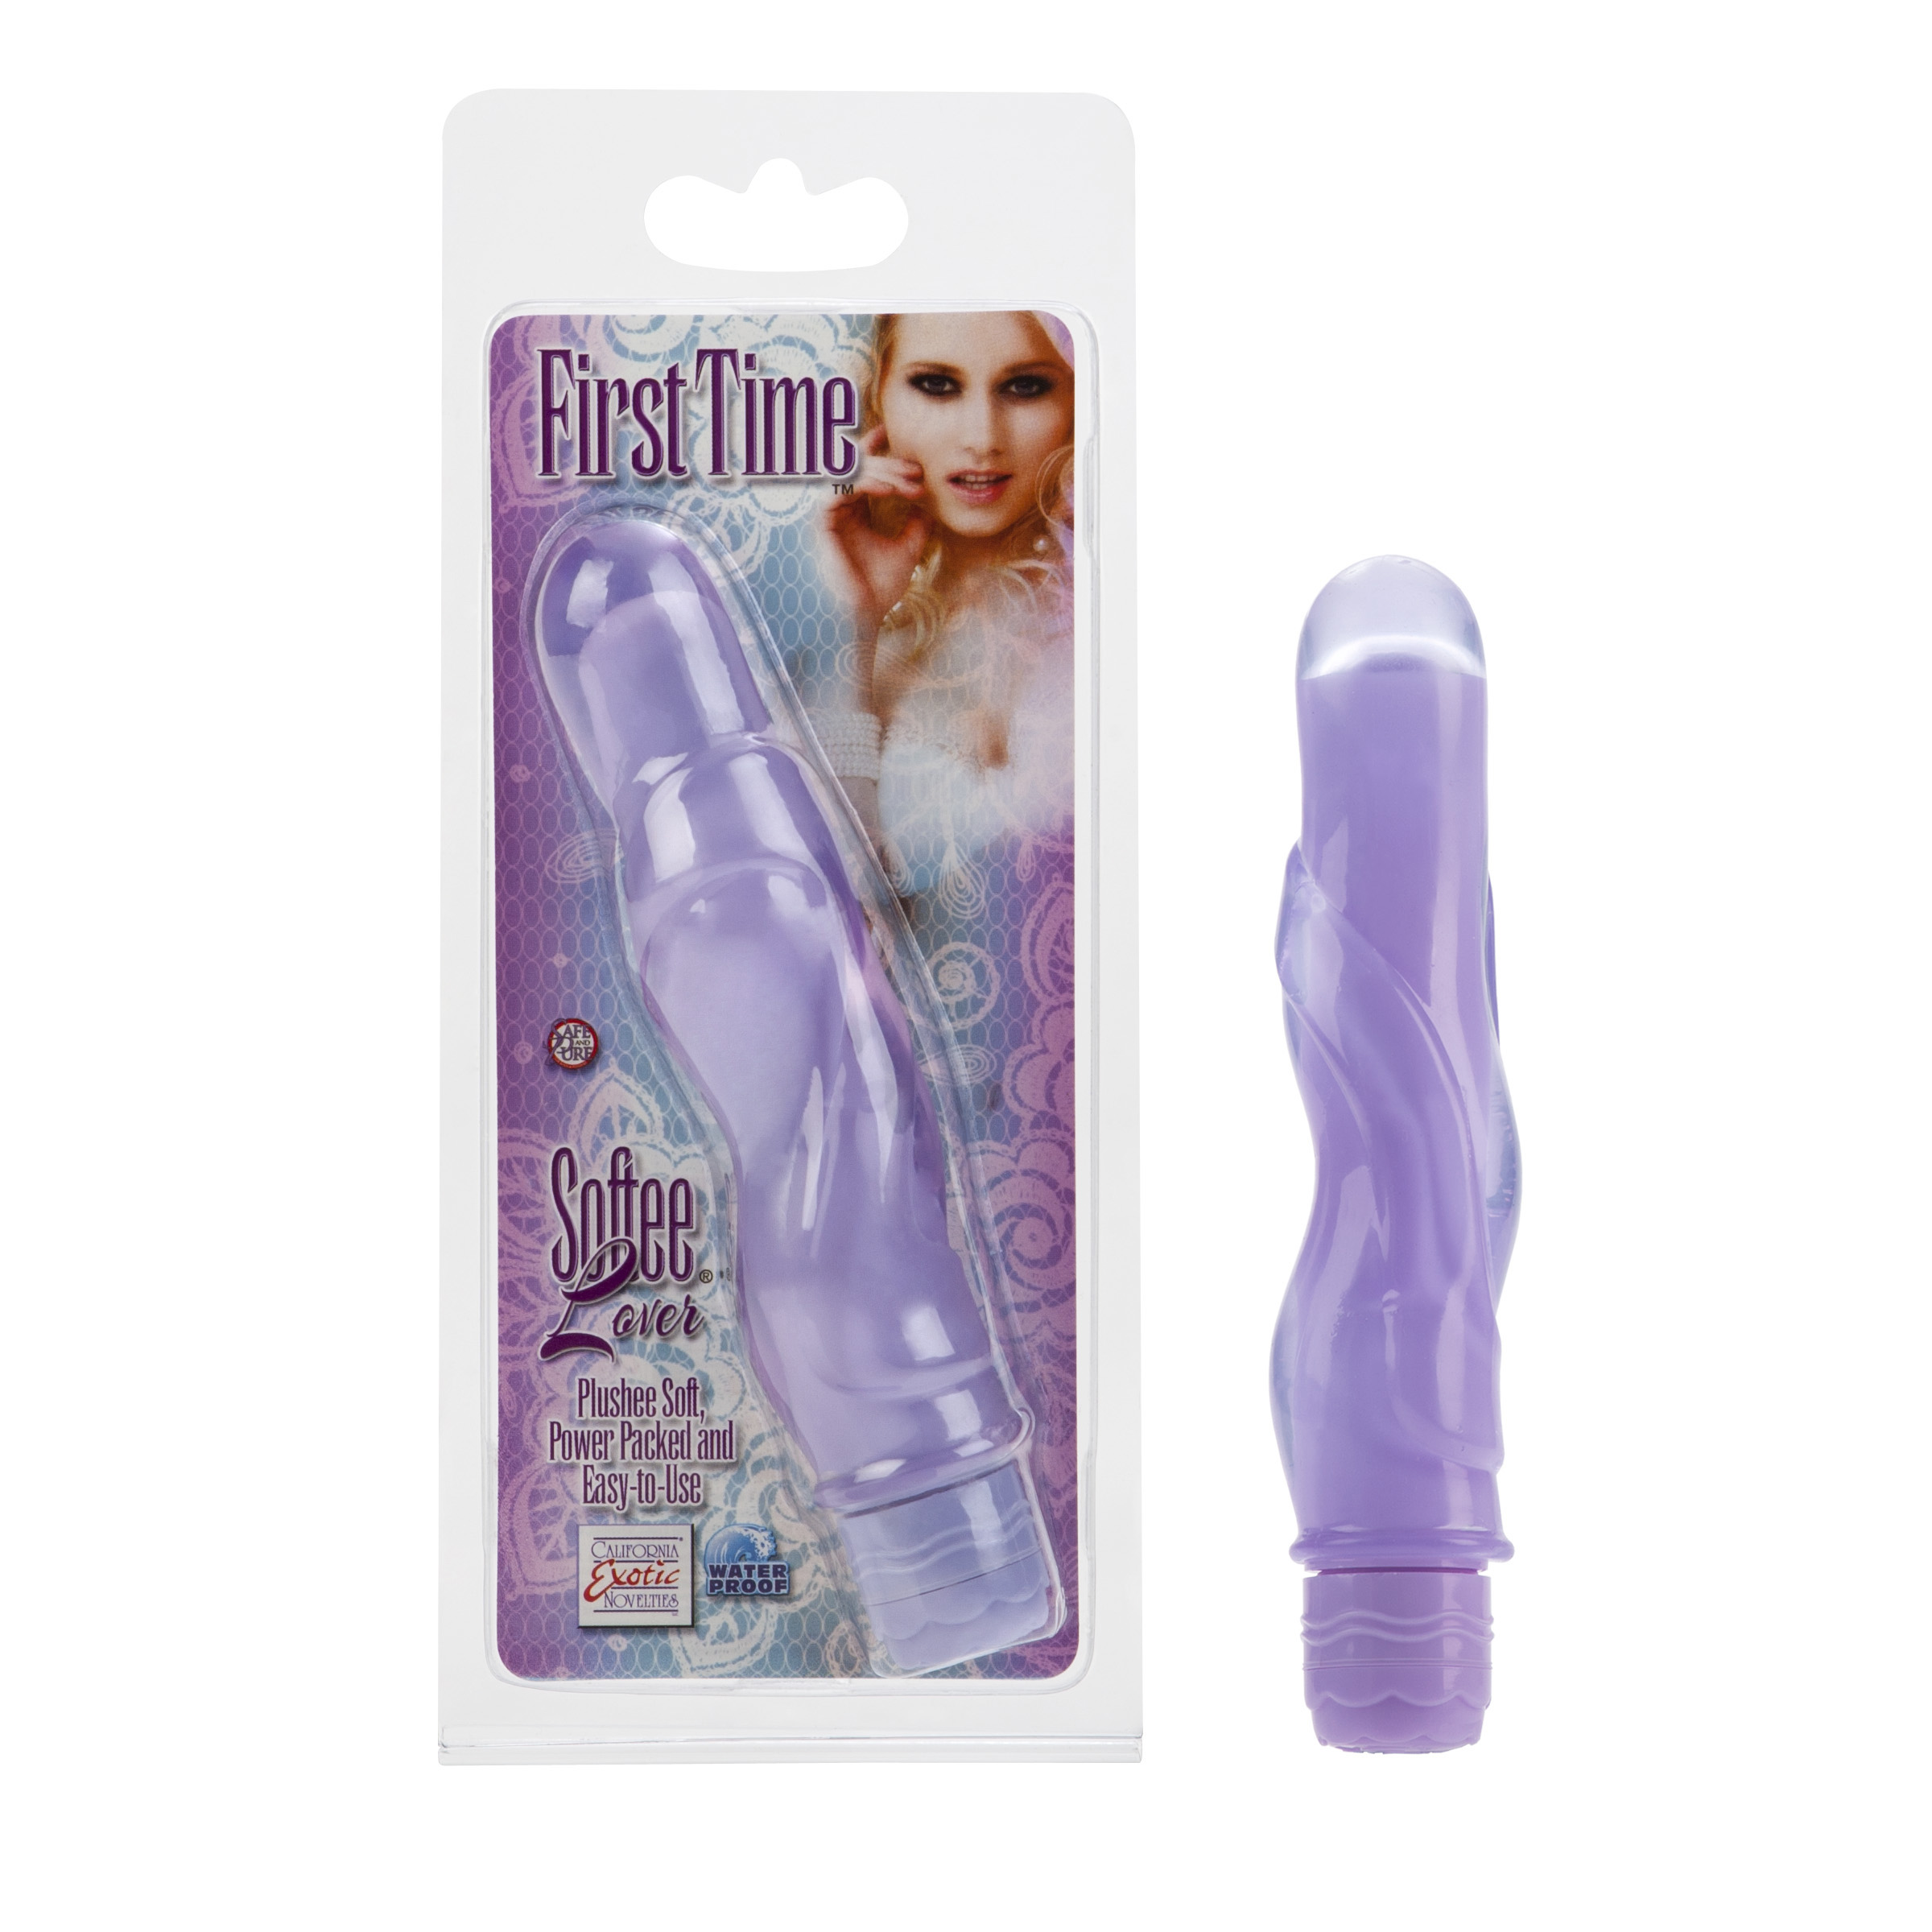 FIRST TIME SOFTEE LOVER PURPLE - SE000422